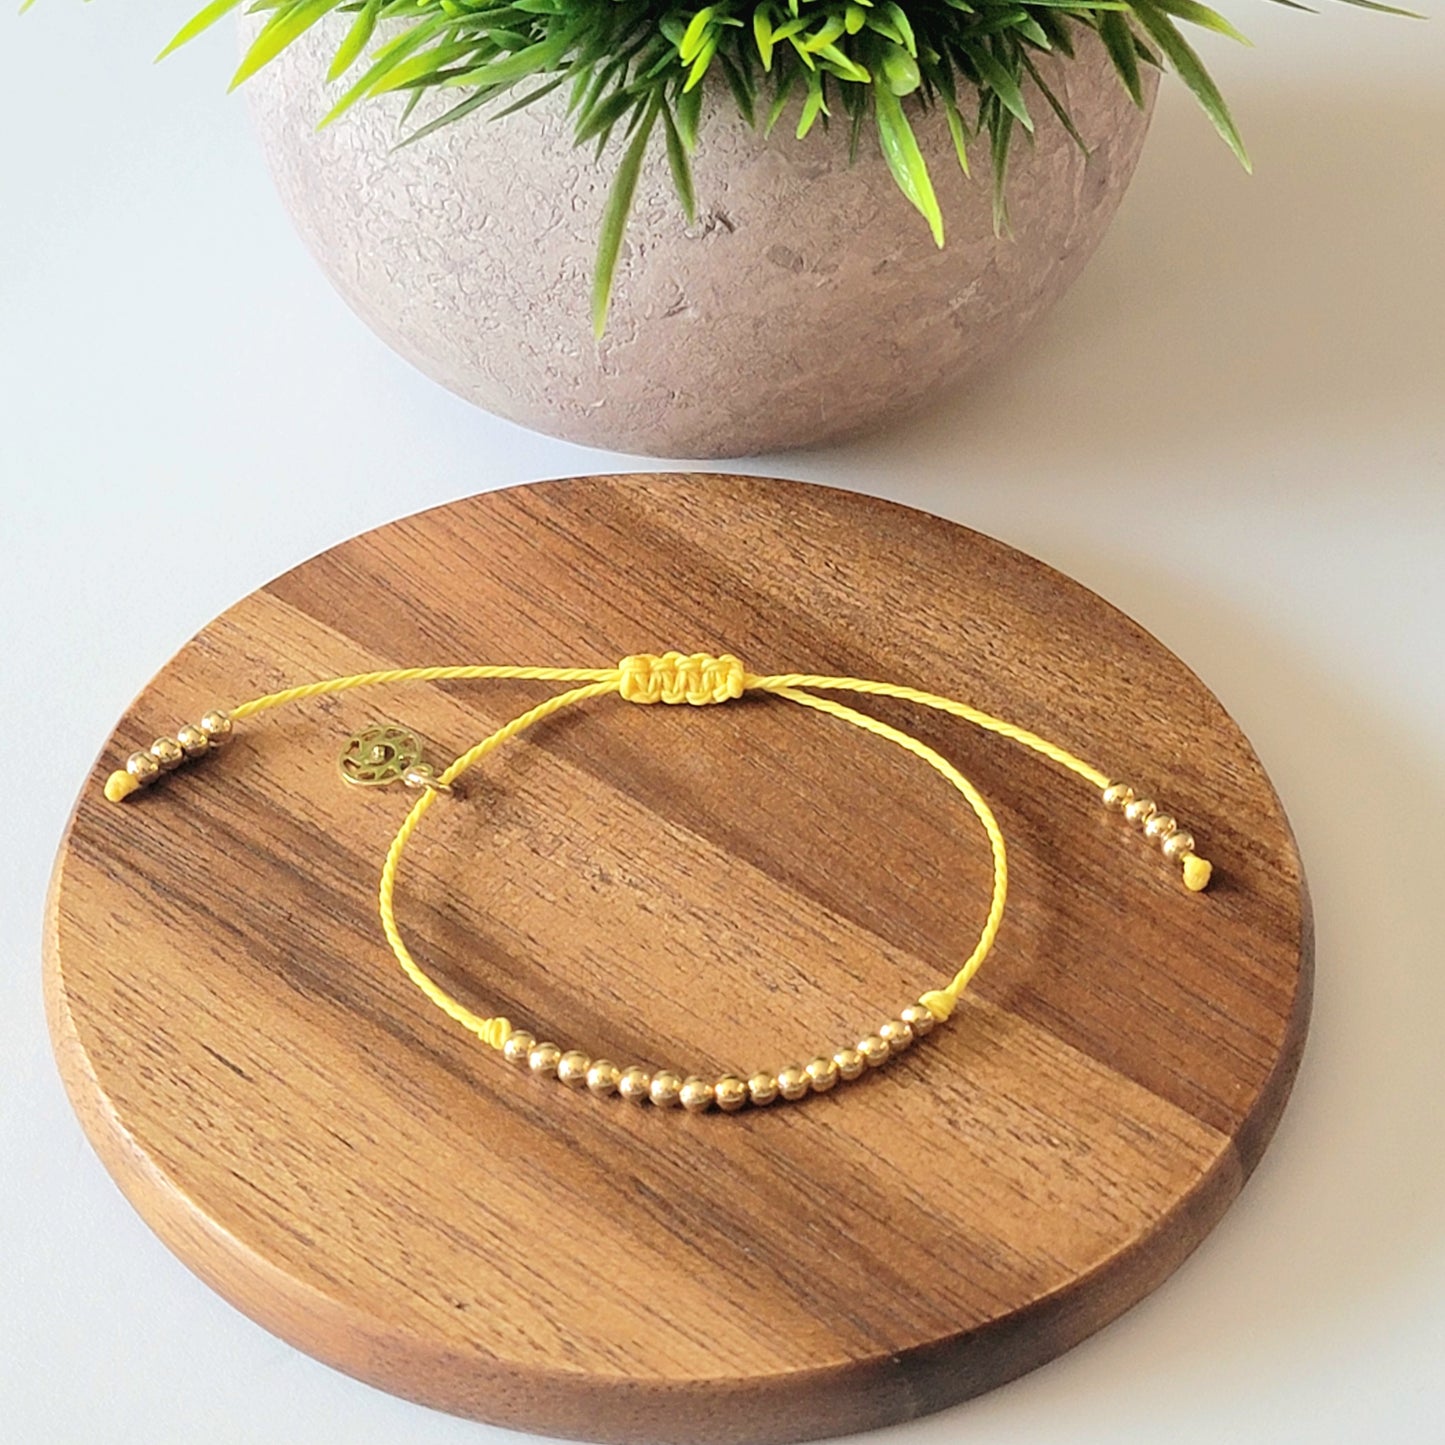 Adjustable Bracelet with Small Round 18k Gold-Filled Beads | Available in many Colors